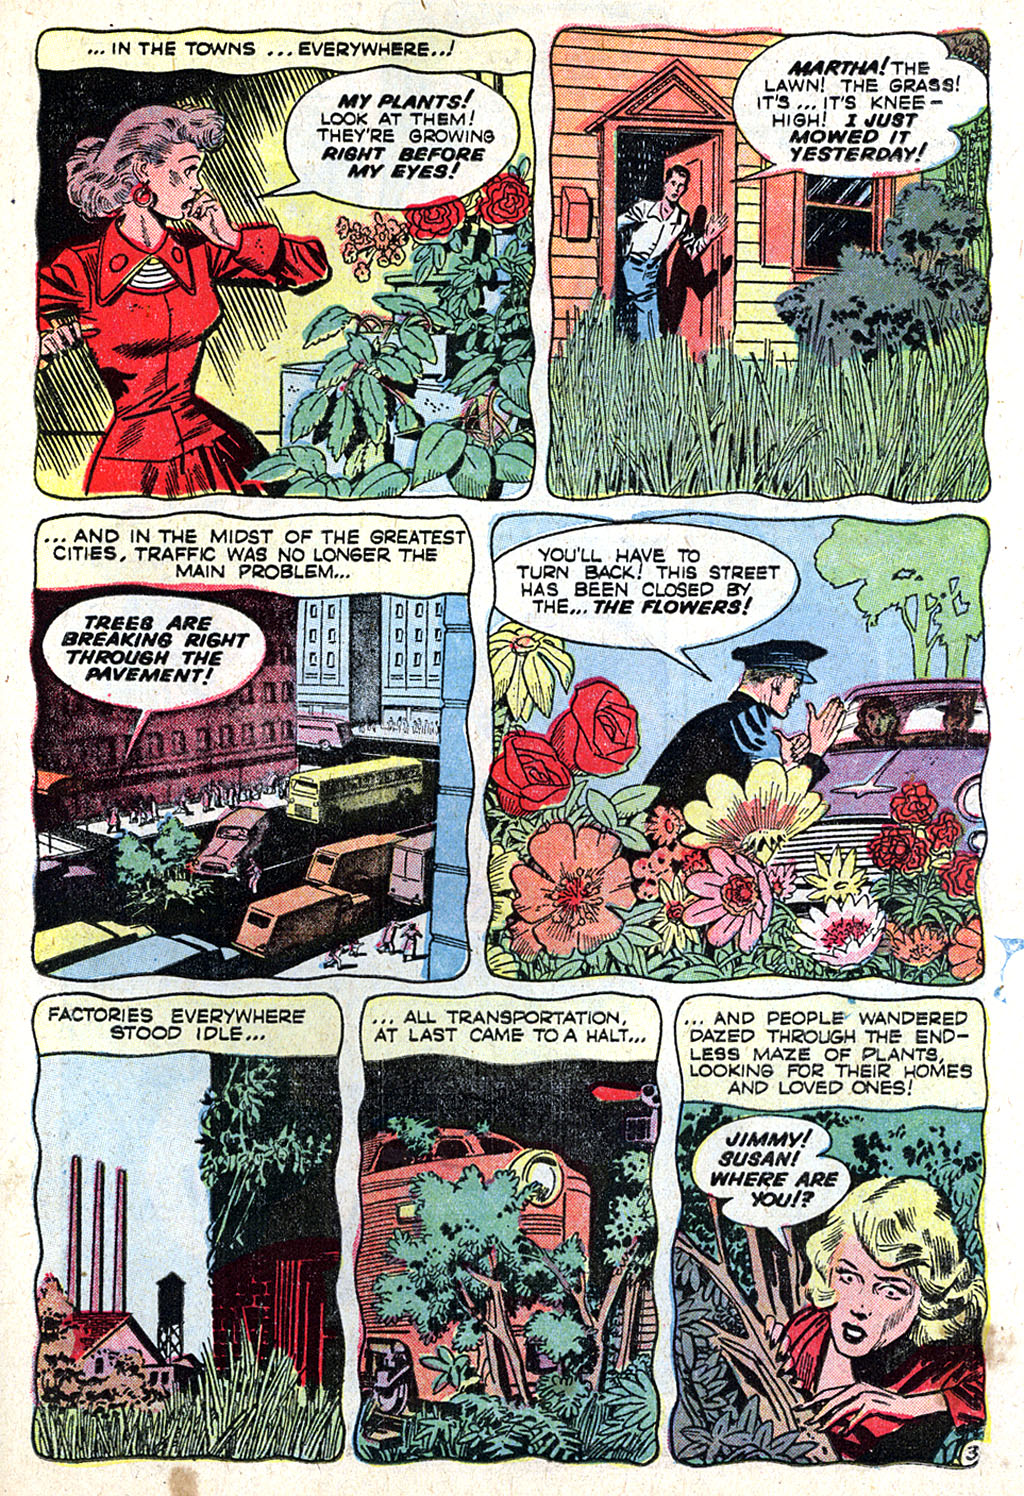 Marvel Tales (1949) 138 Page 21